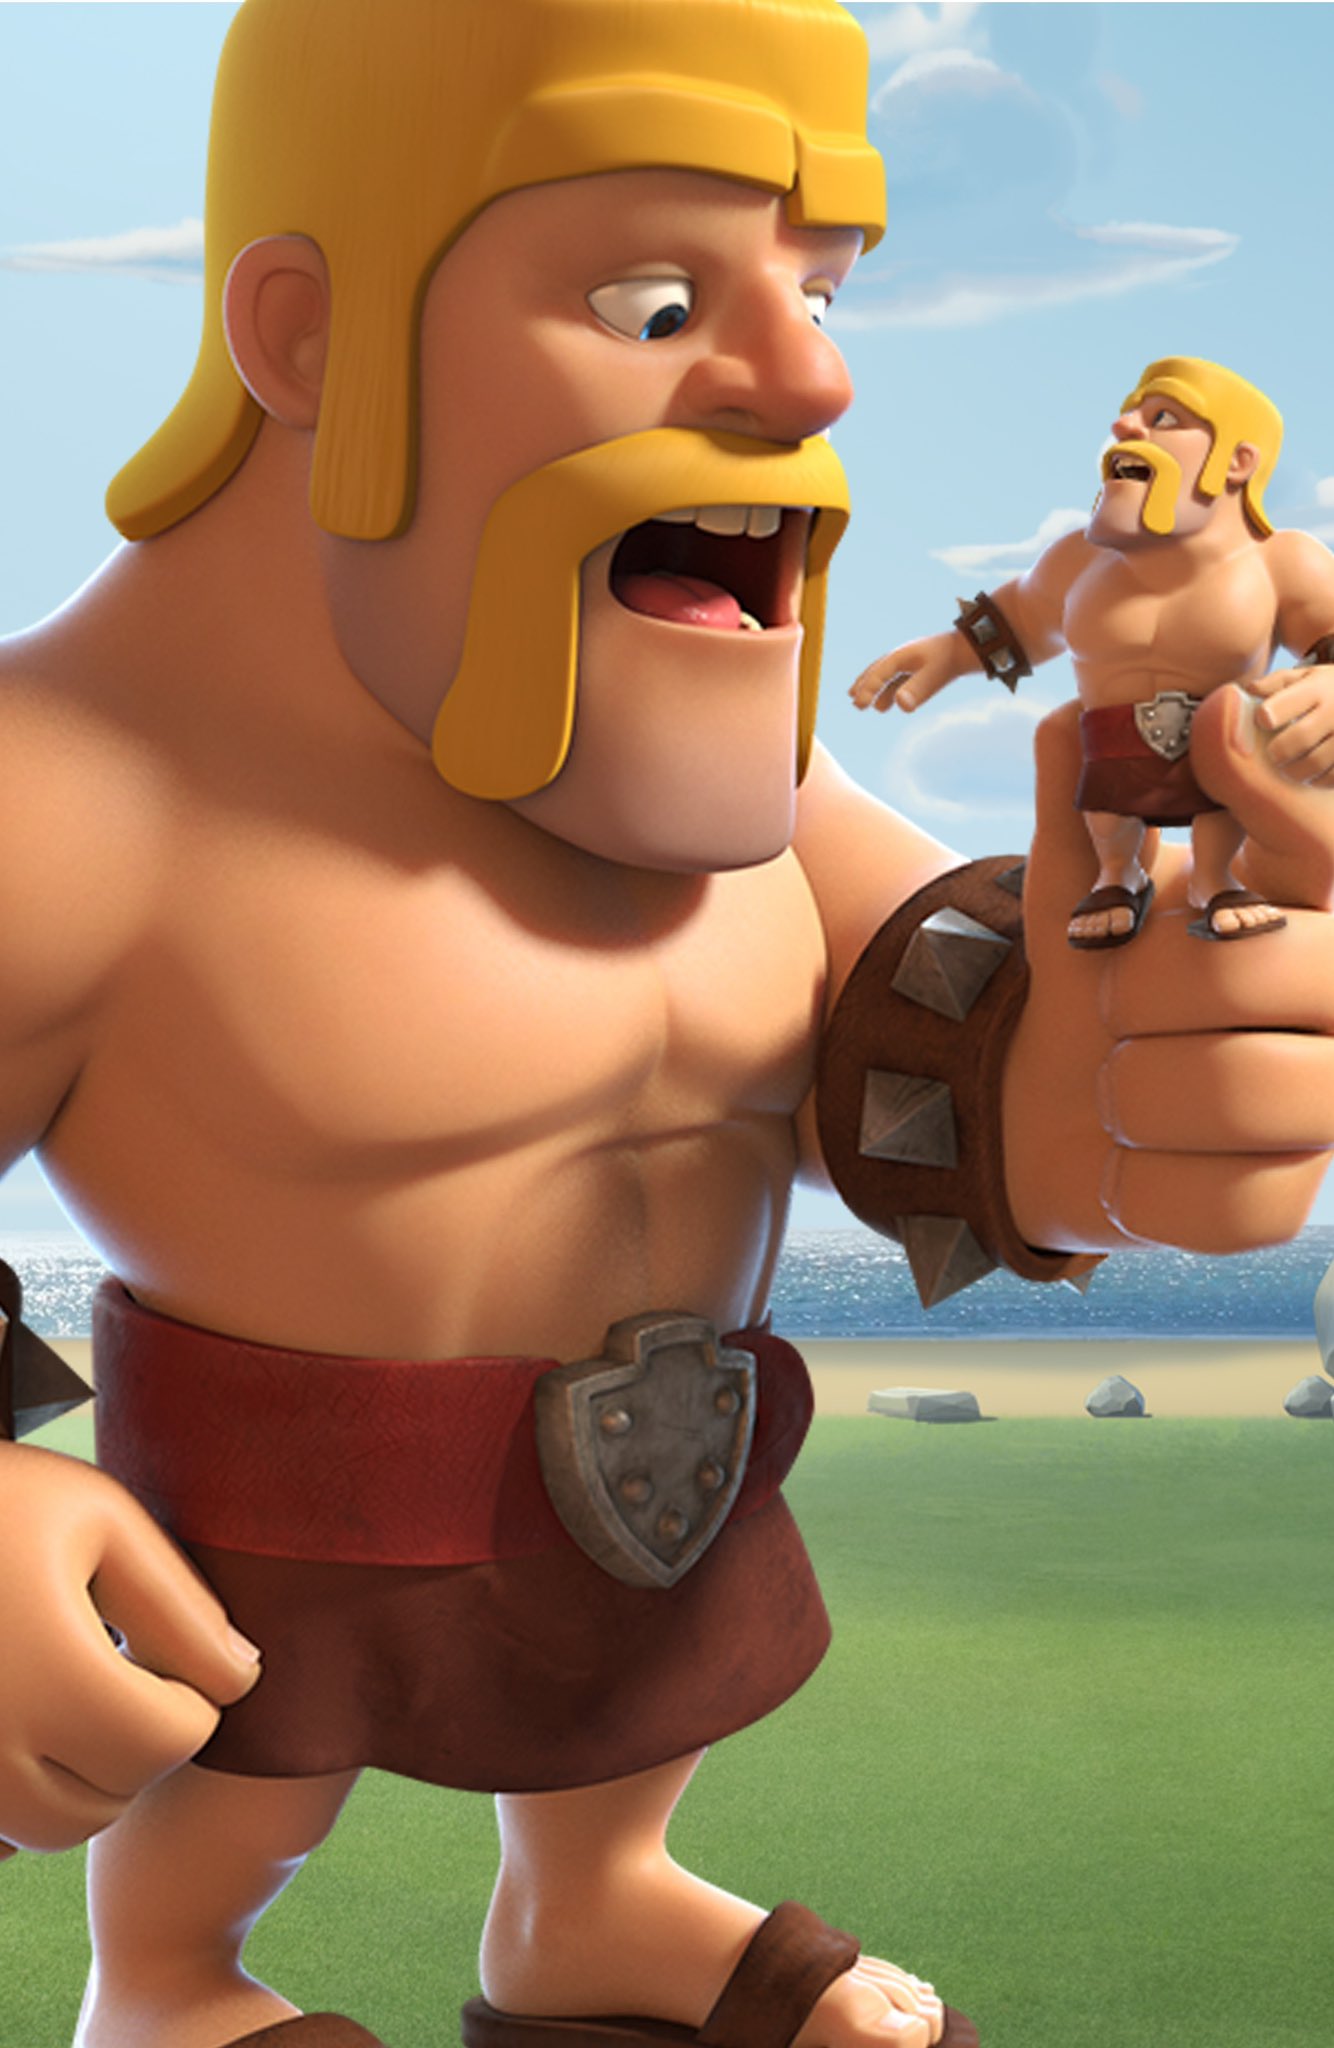 Clash of clans on apparently bigger uncropped images now work on too lets give this a try ð httpstcoaxbhtwcrb